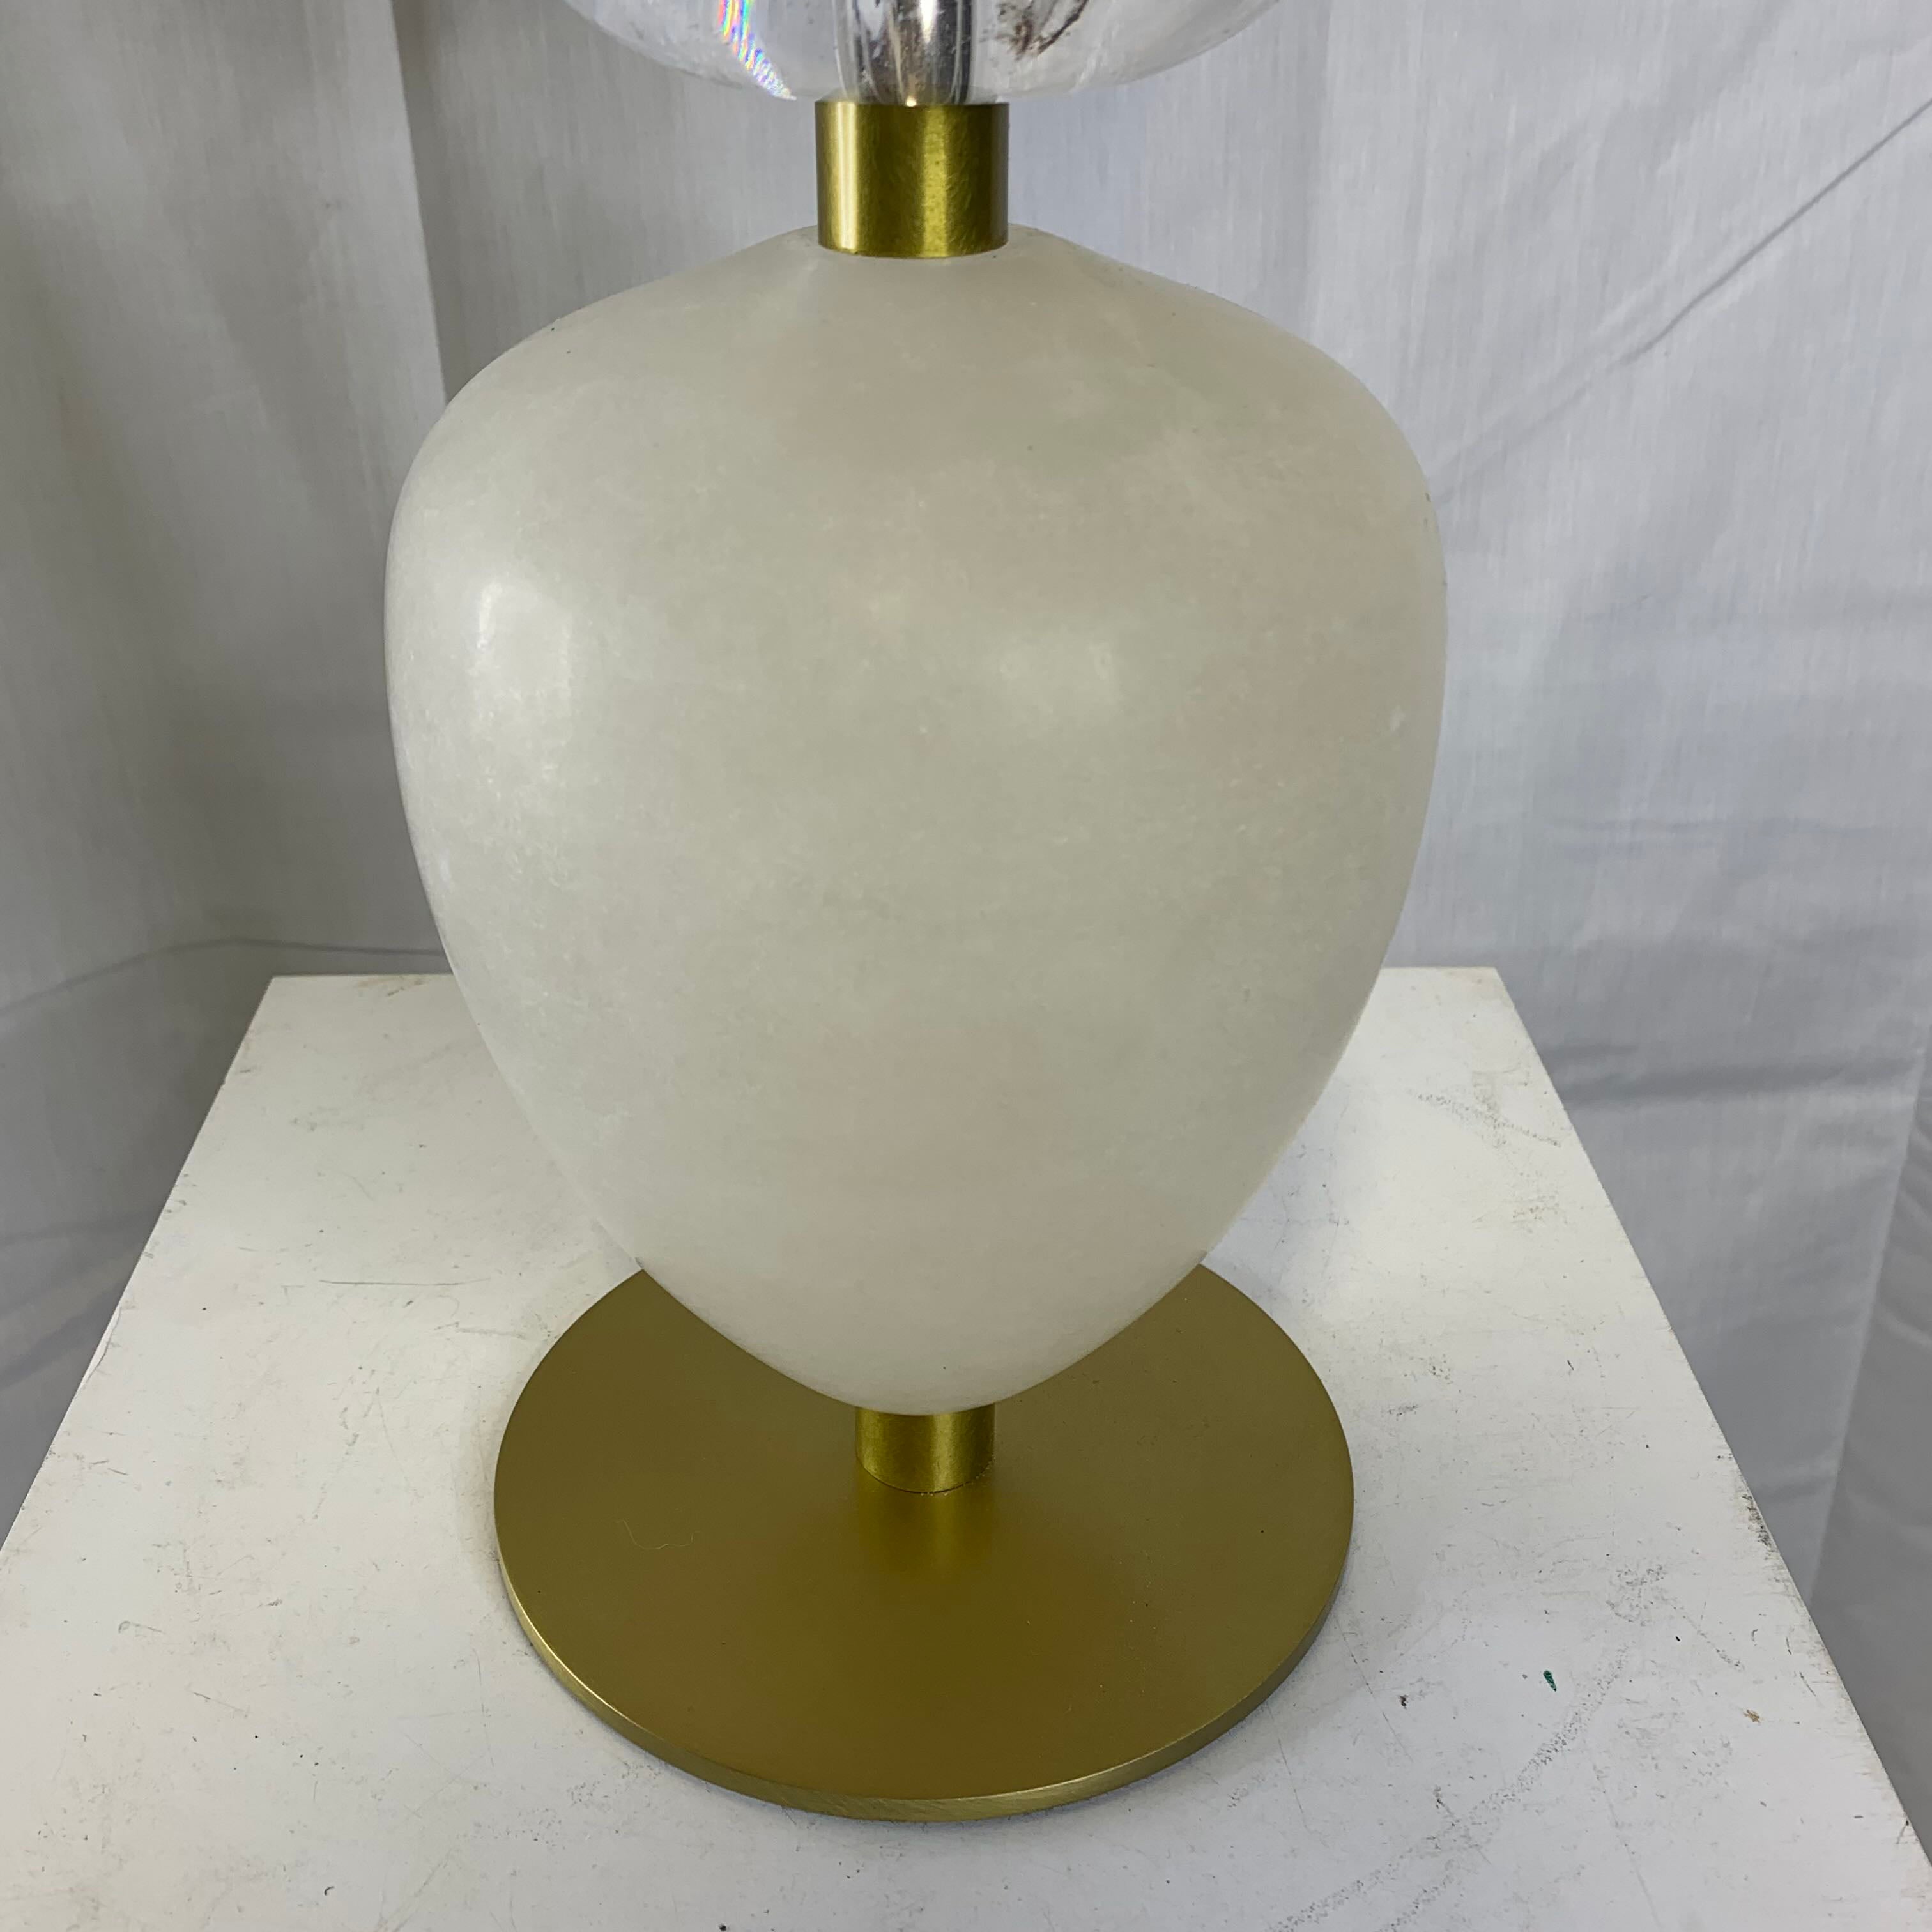 6" Diameter x 27" Arteriors Aubrey Antique Brass Finish with Opal Swirl Crystal and Snow Marble Table Lamp